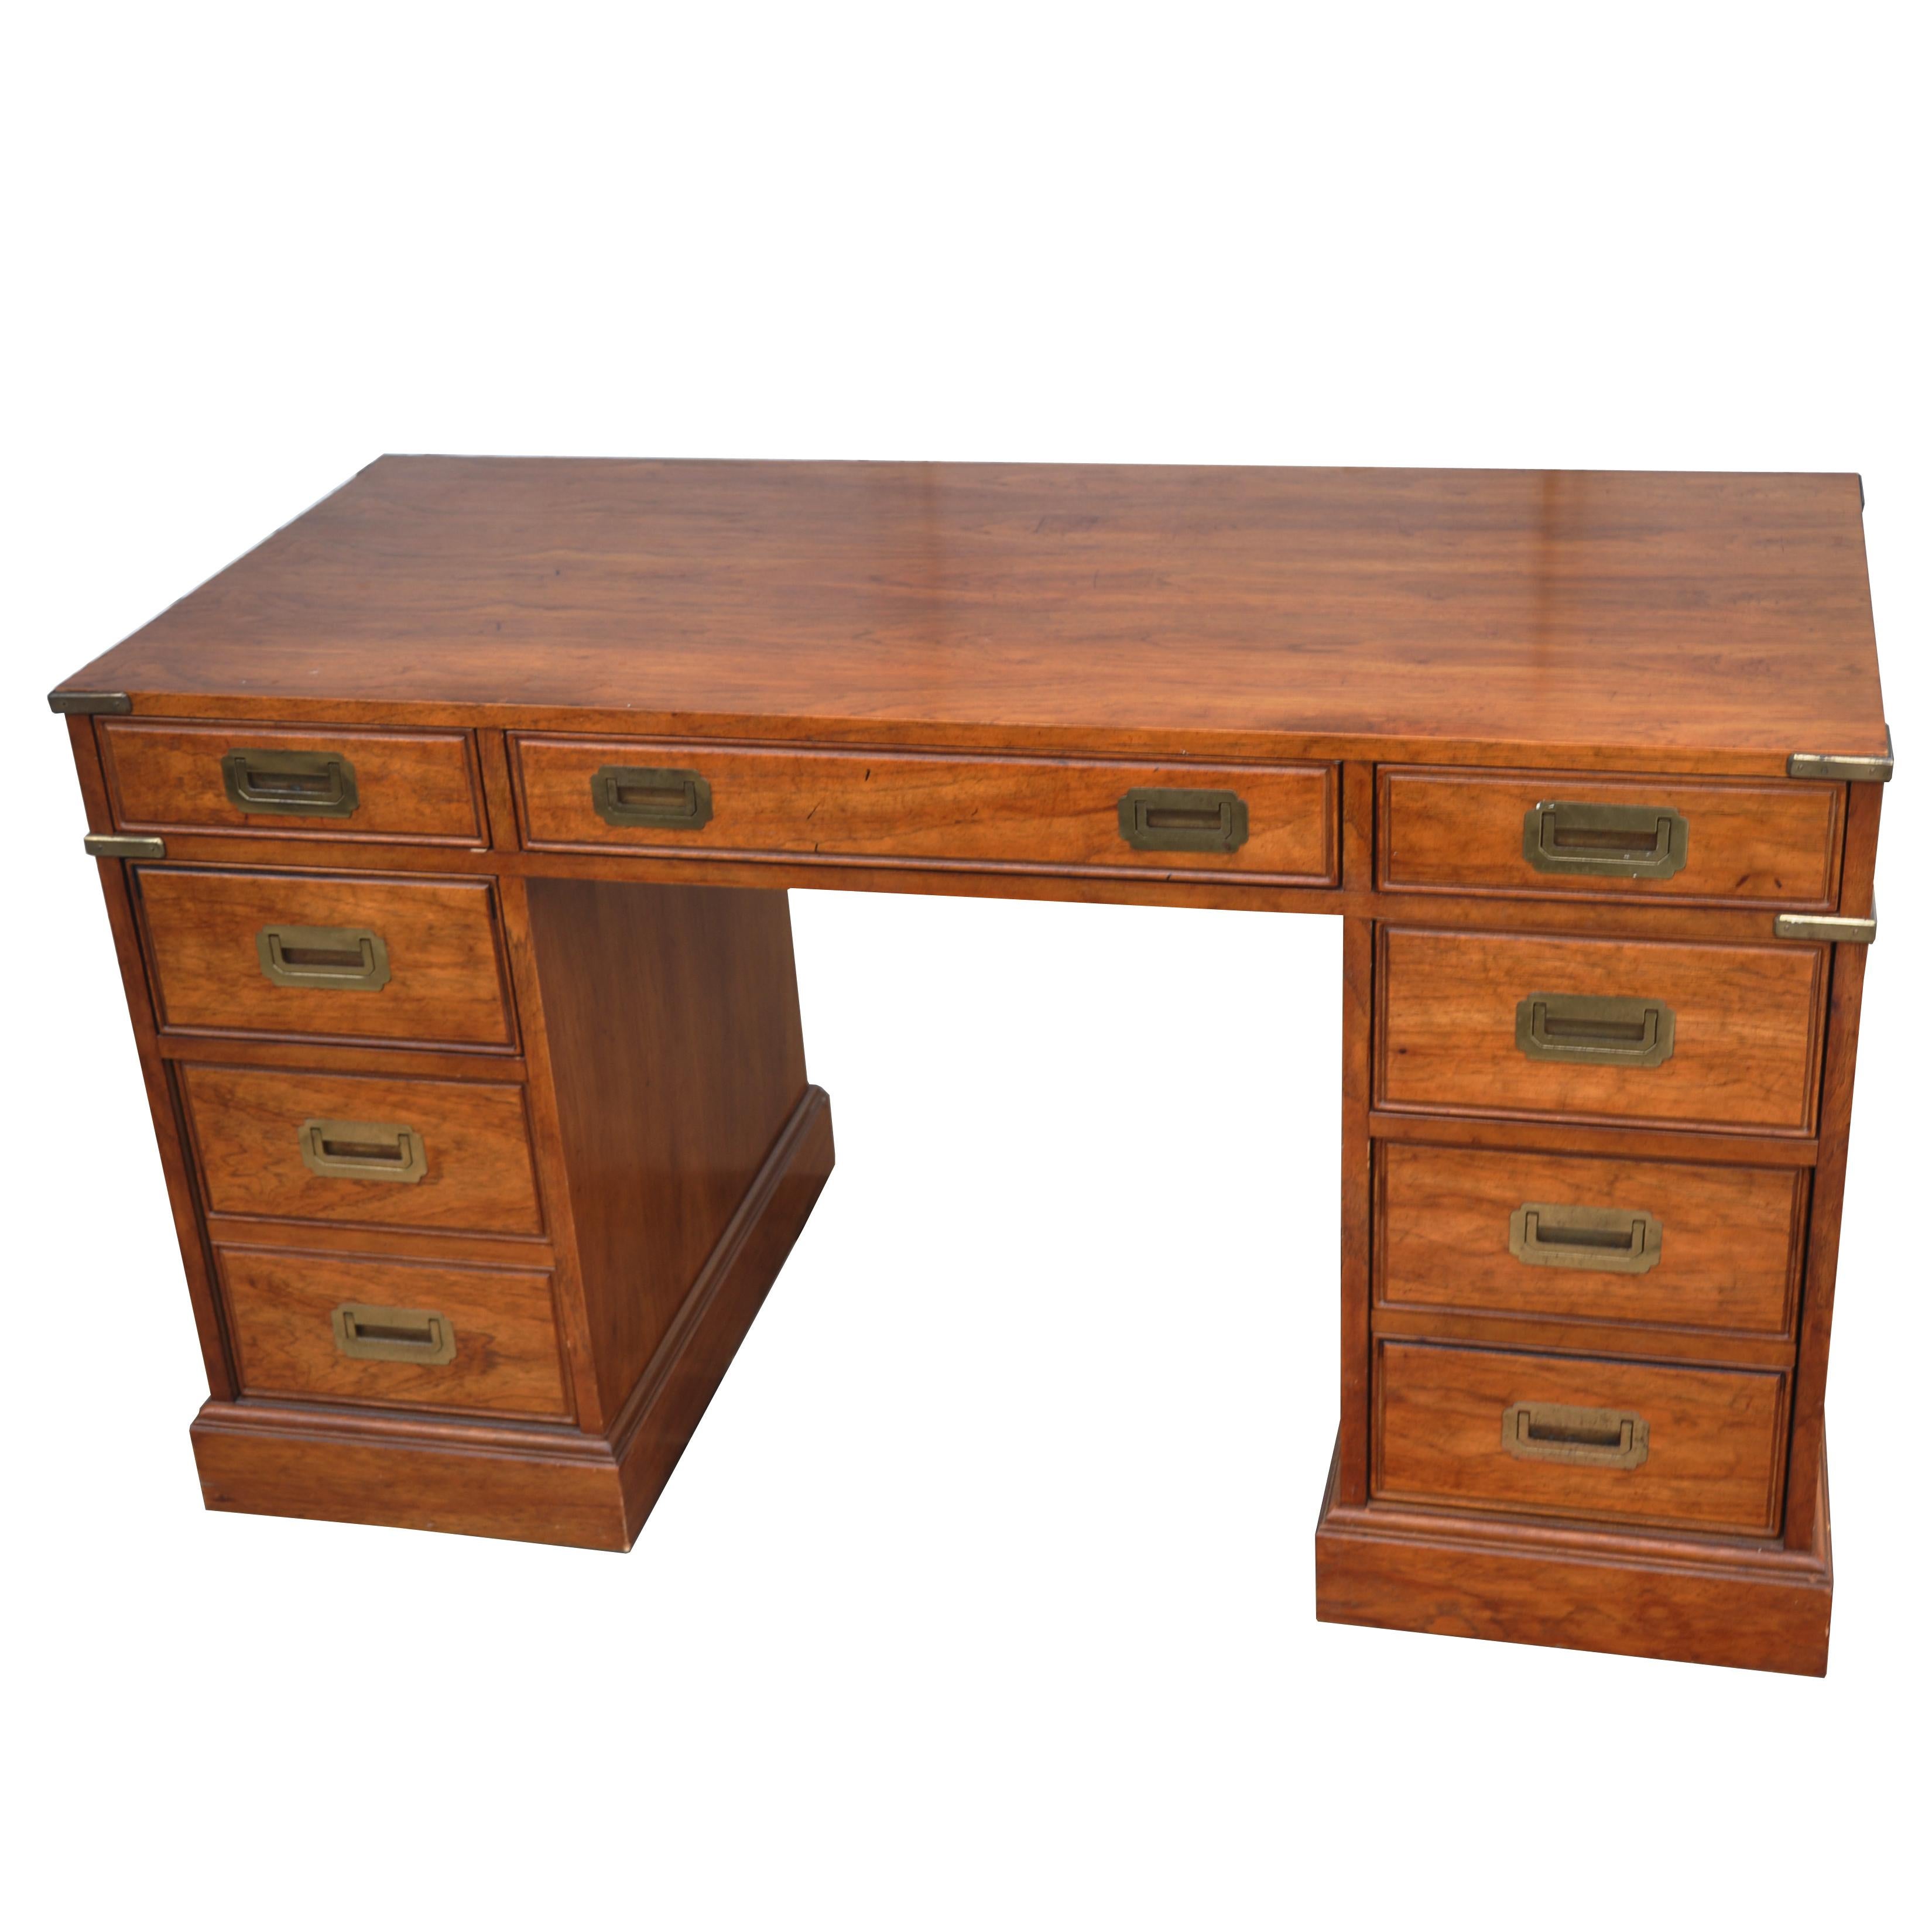 national mt. airy executive desk